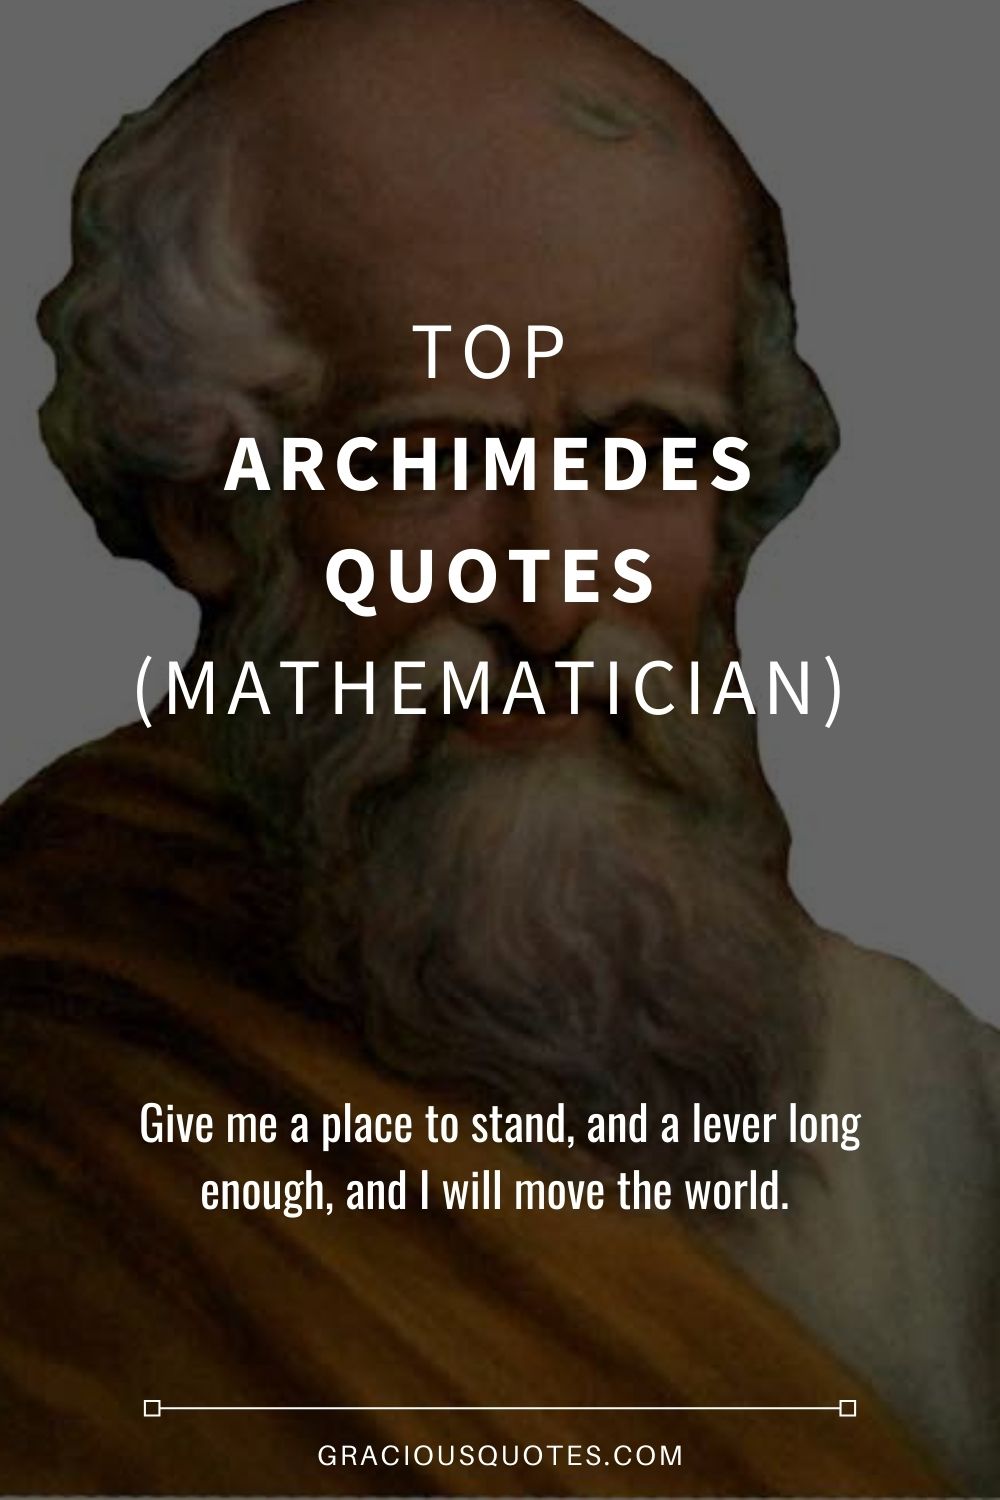 Top Archimedes Quotes (MATHEMATICIAN) - Gracious Quotes